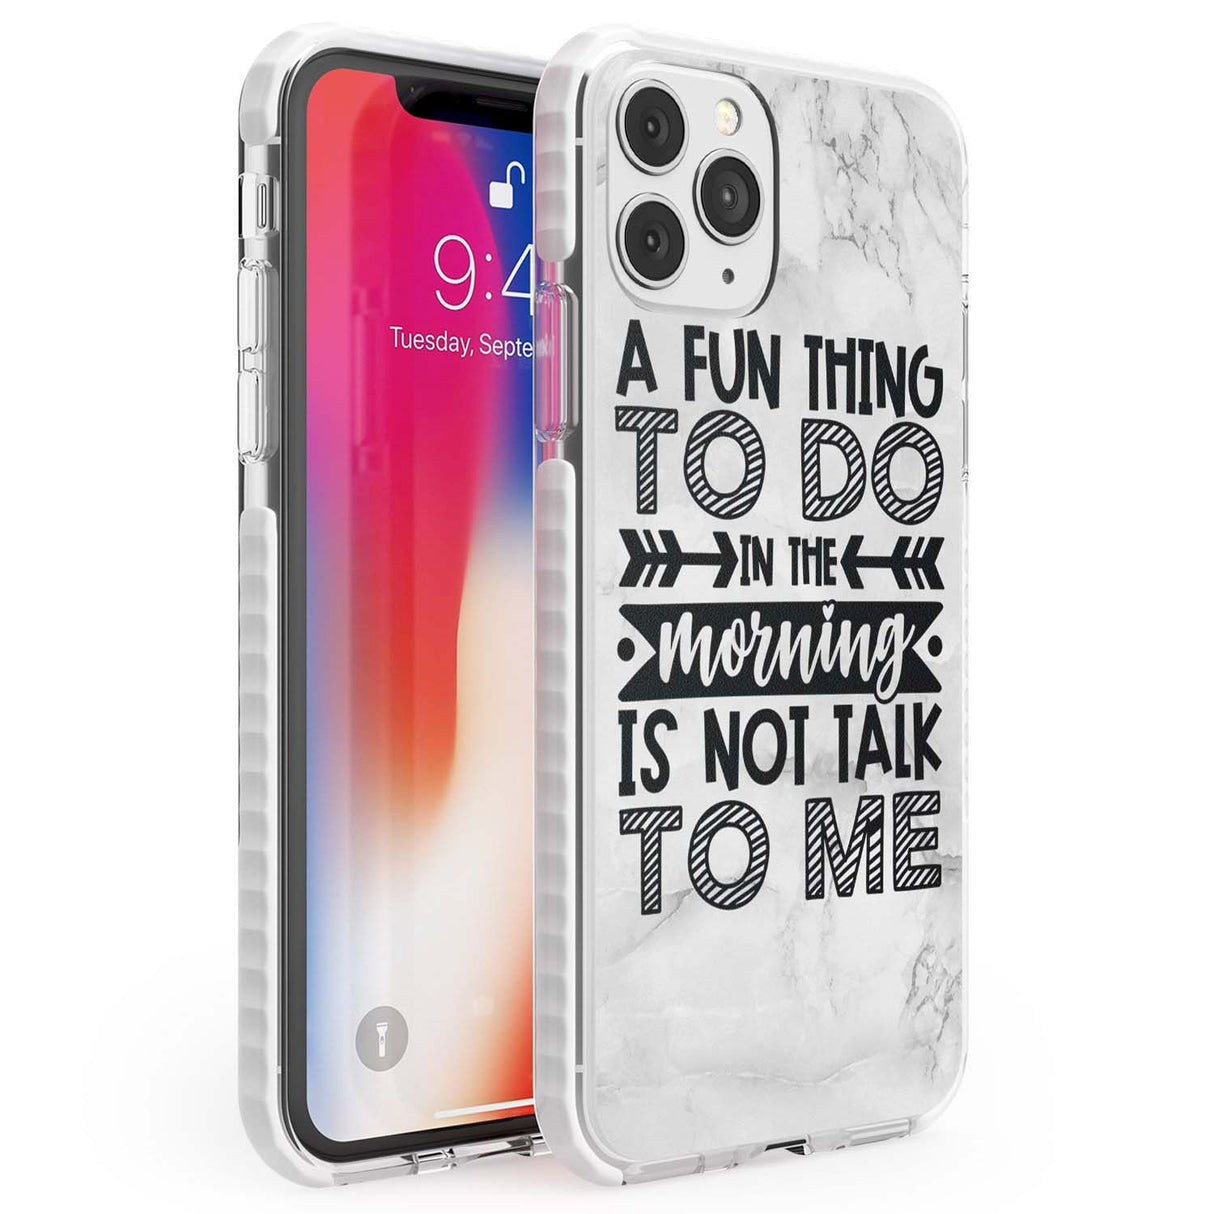 A Fun thing to do Phone Case iPhone 11 Pro Max / Impact Case,iPhone 11 Pro / Impact Case,iPhone 12 Pro / Impact Case,iPhone 12 Pro Max / Impact Case Blanc Space